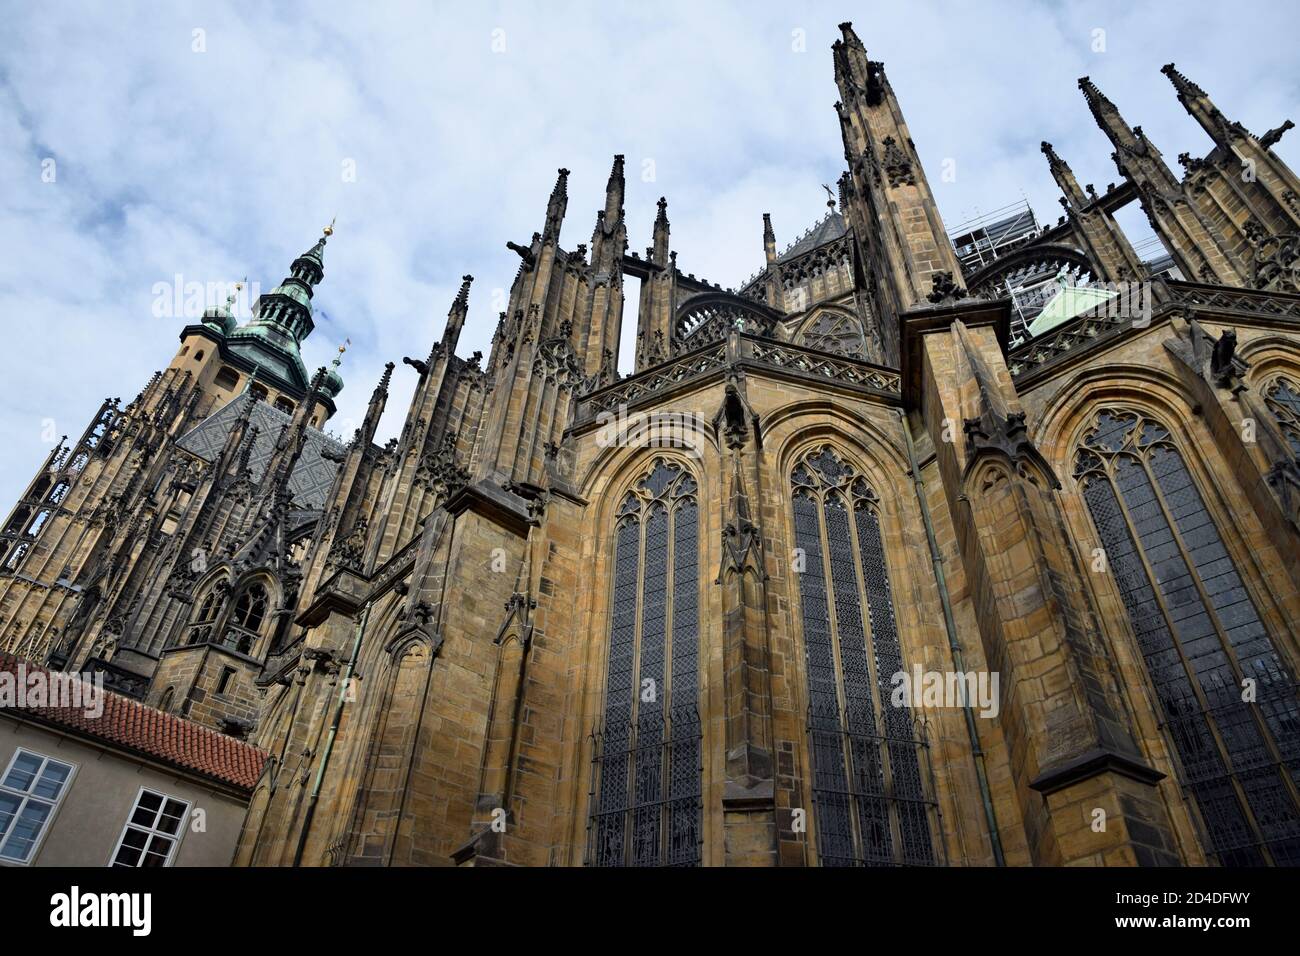 The Metropolitan Cathedral of Saint Vitus, located within Prague Castle in Czechia contains the tombs of many Bohemian kings and Holy Roman Emperors. Stock Photo